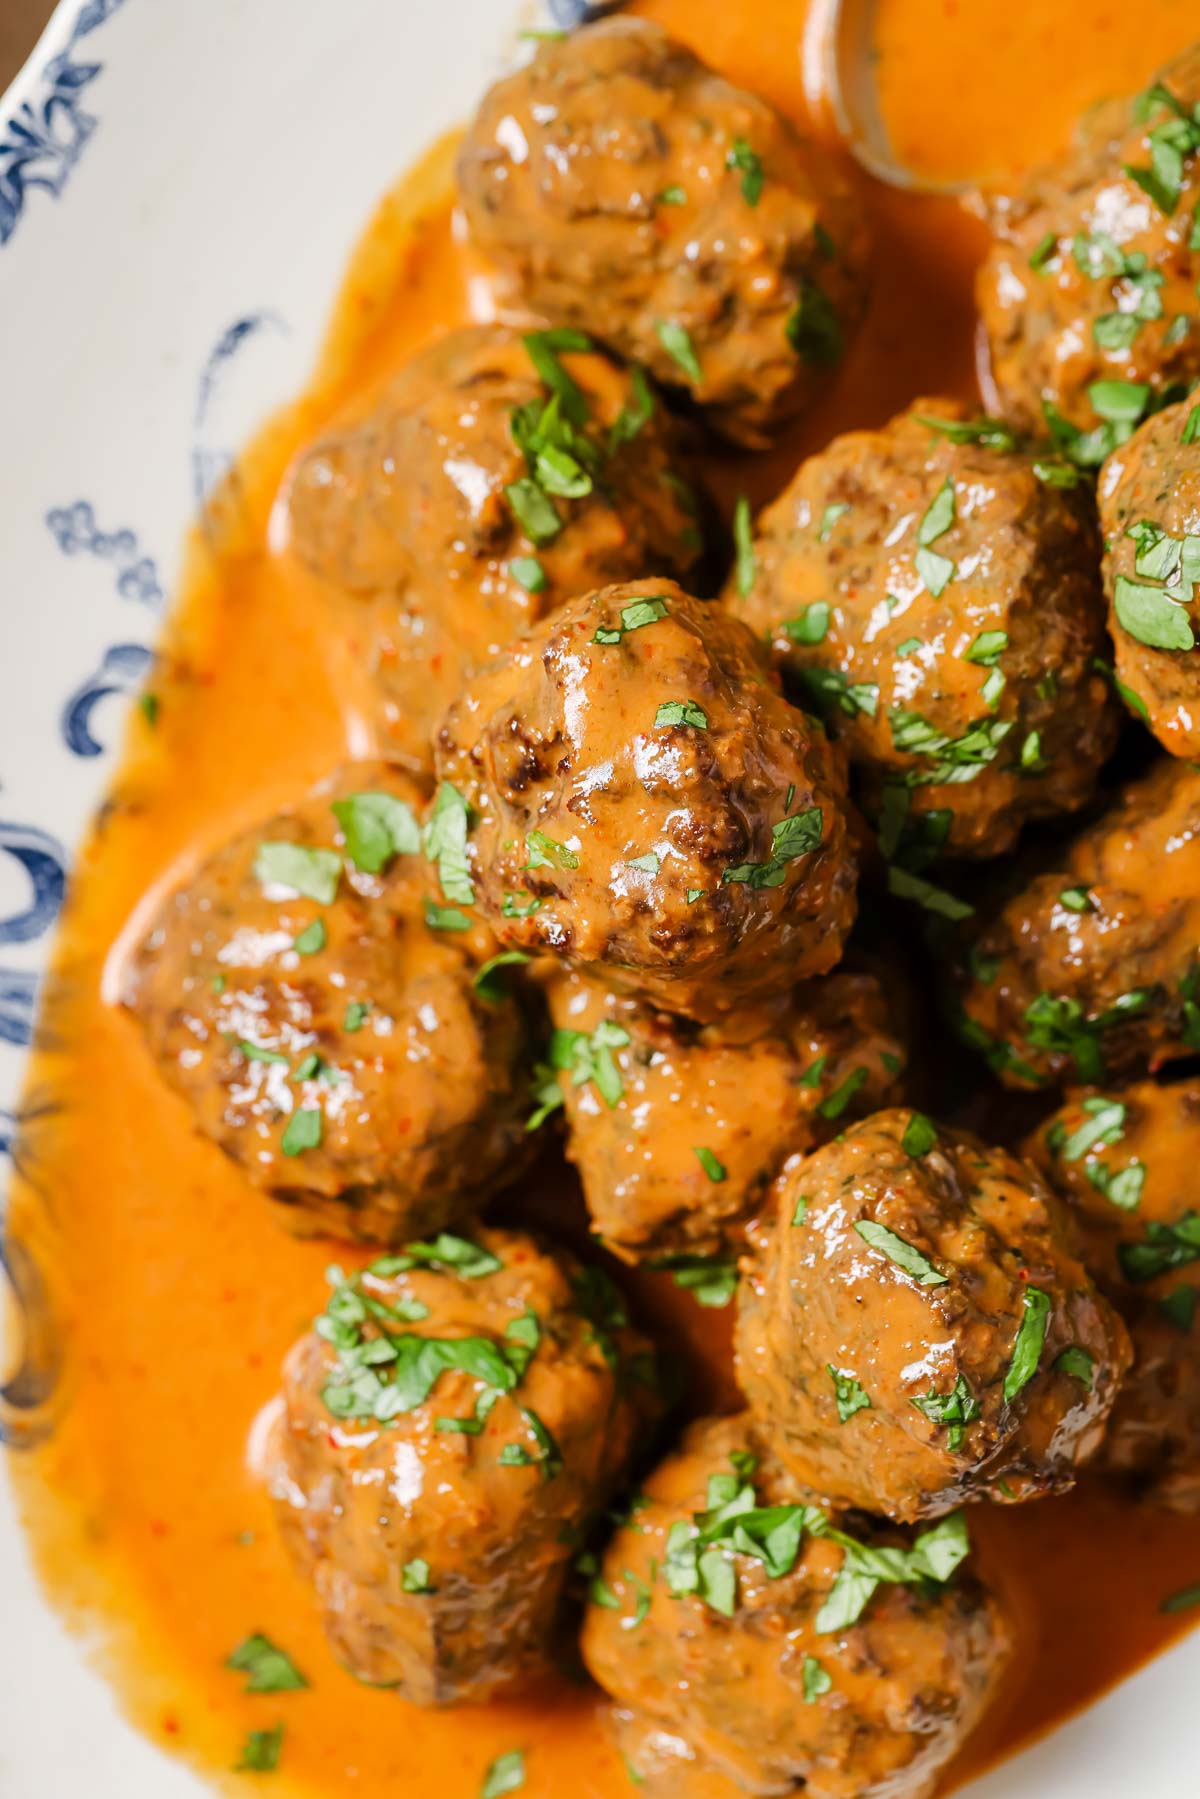 A close shot shows the texture and glossy curry sauce covered Thai meatballs.